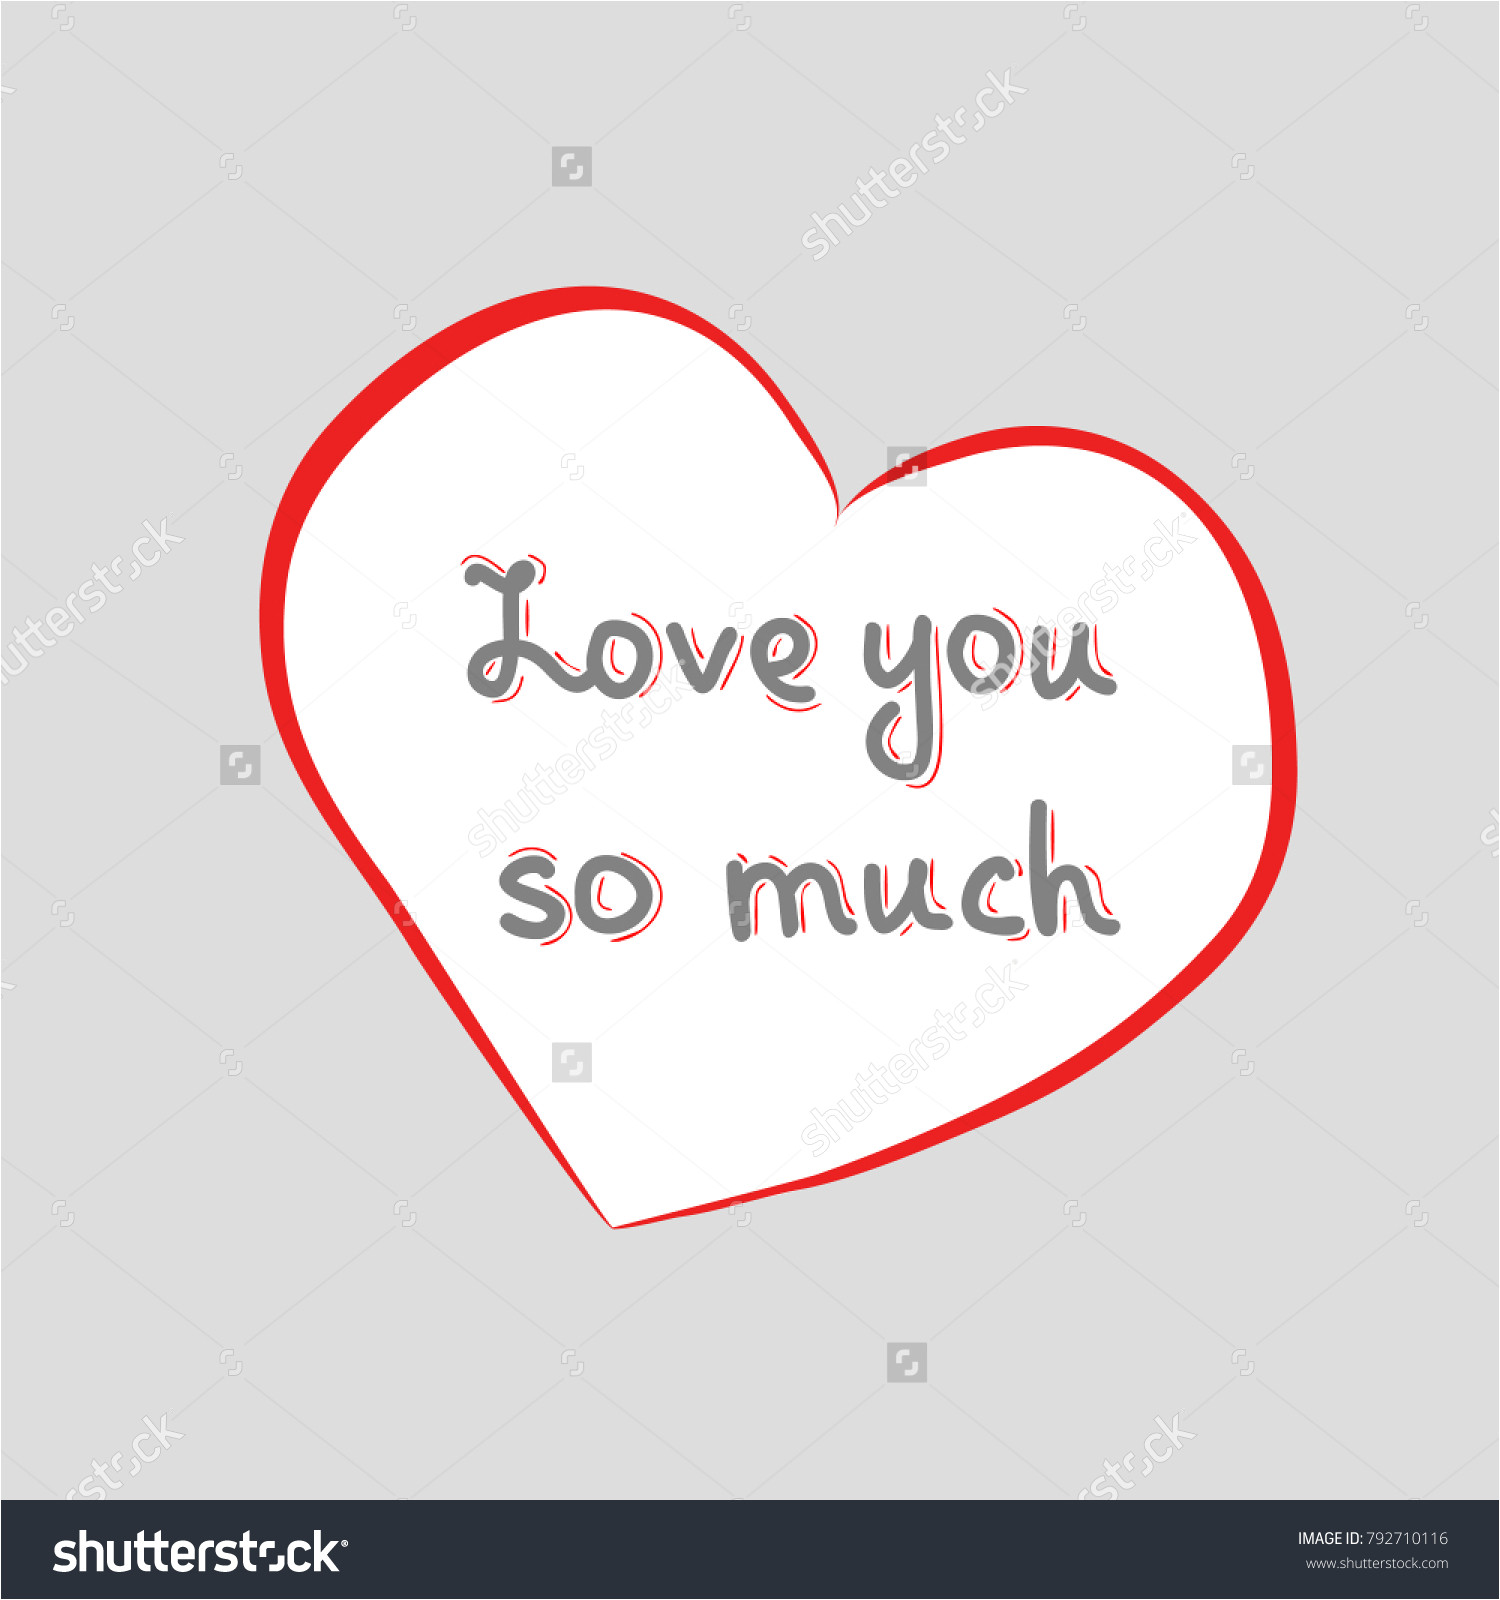 stock vector hand written lettering quote inside od heart on a gray background valentines day greeting card 792710116 jpg